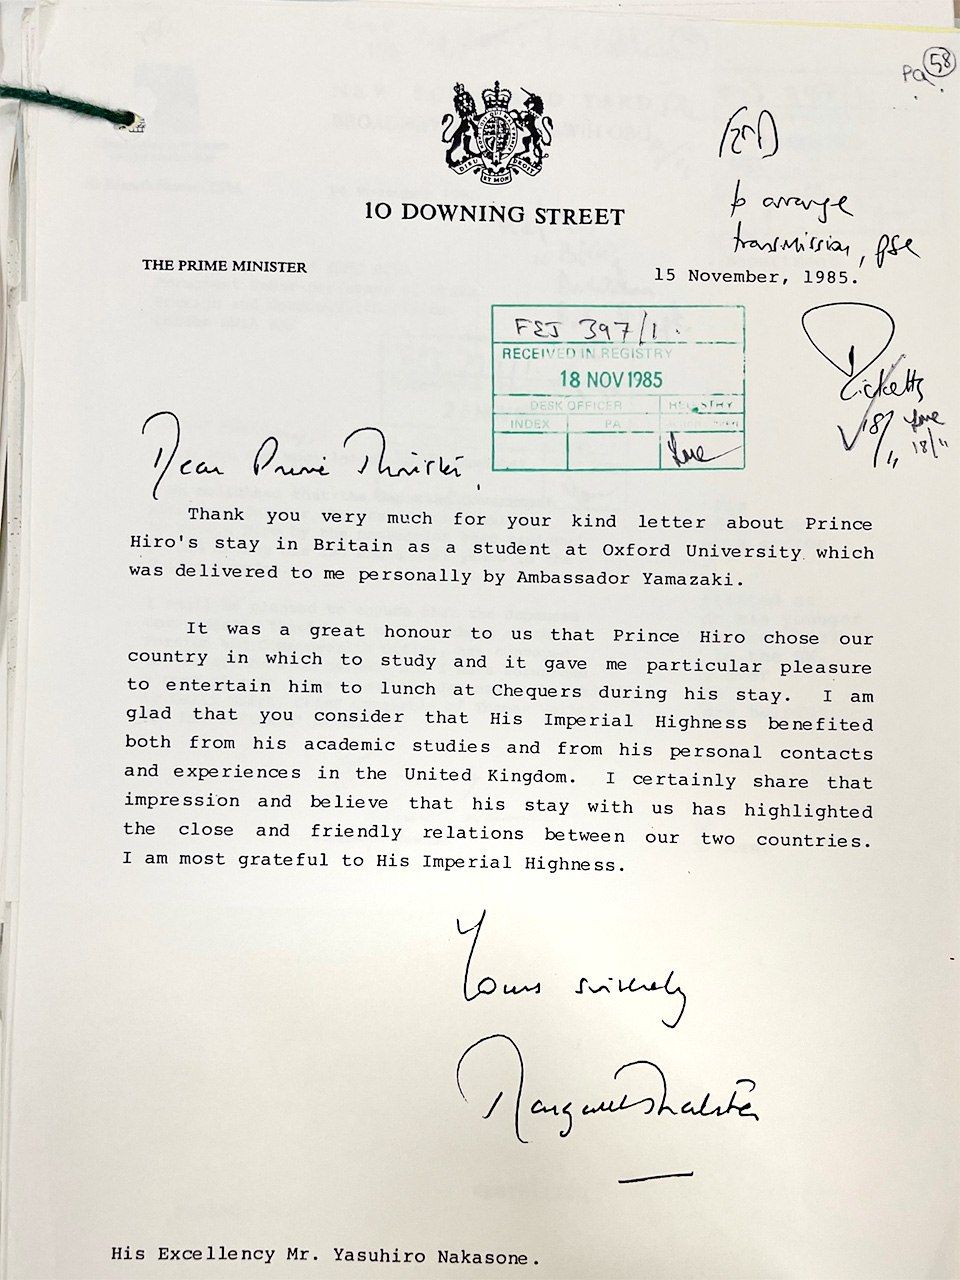 Prime Minister Thatcher’s reply to Prime Minister Nakasone. (Courtesy of the British National Archives; photo by author)